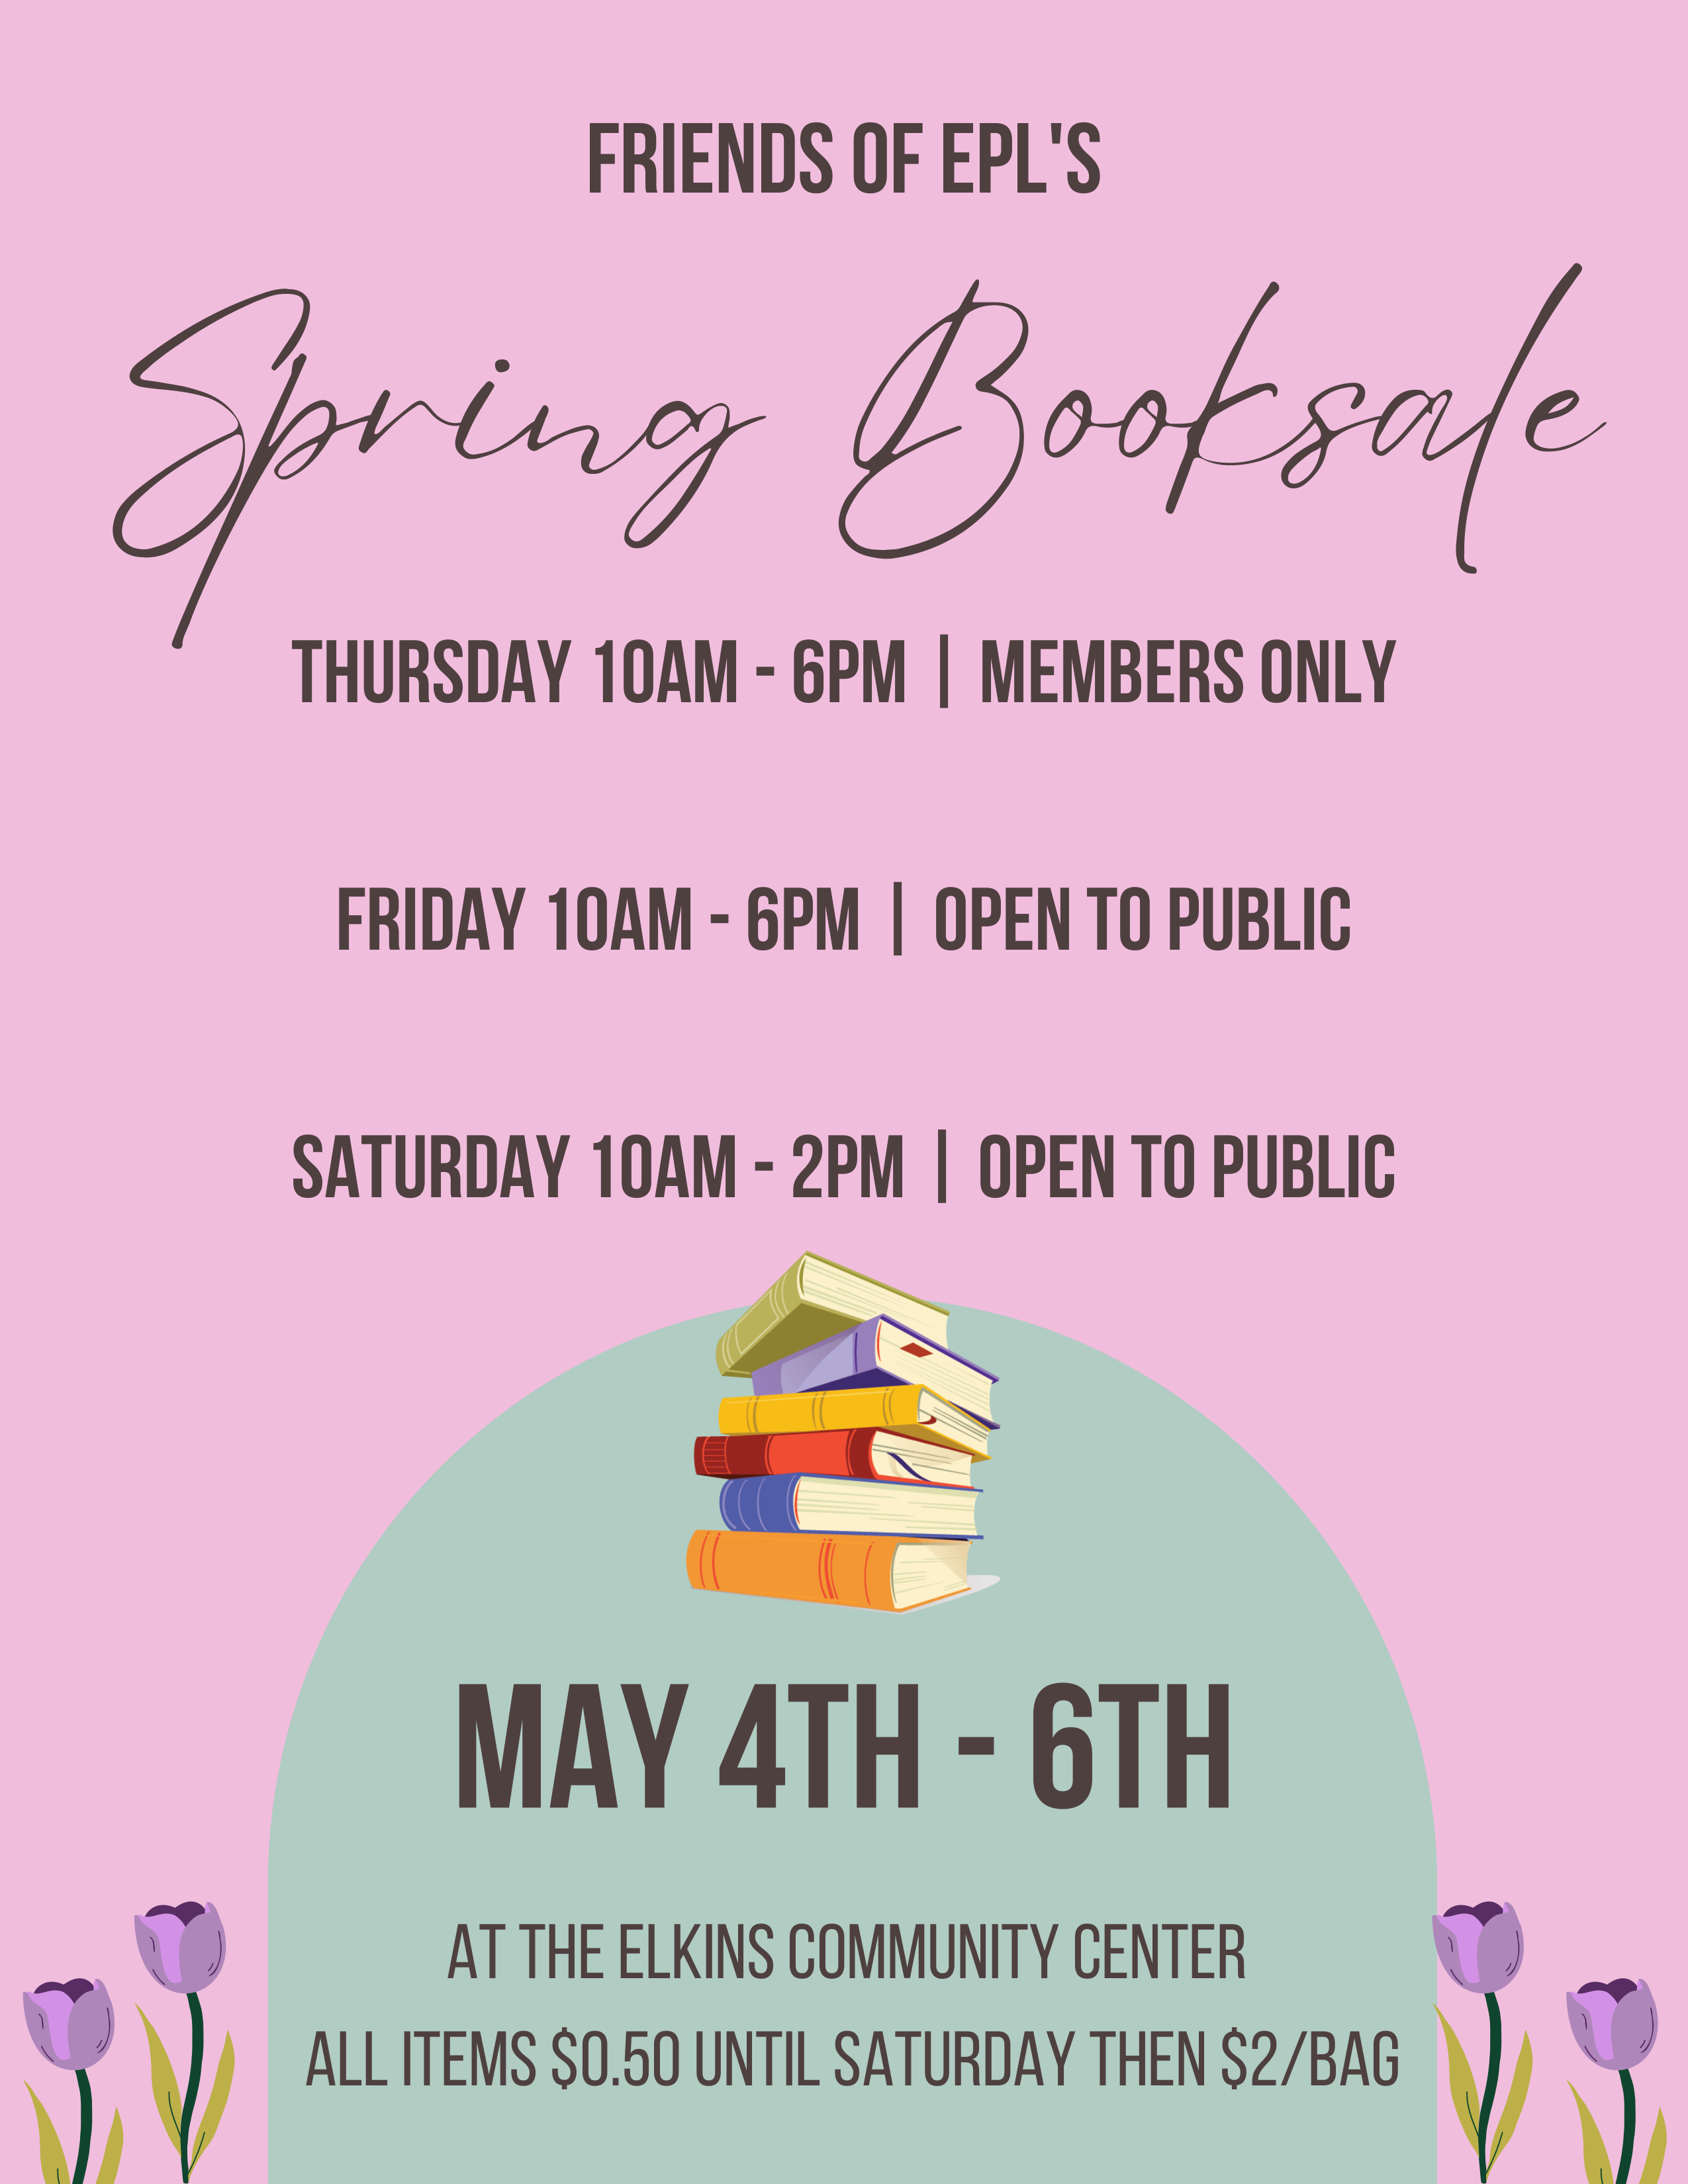 Volunteers, books needed for Spring Book Sale